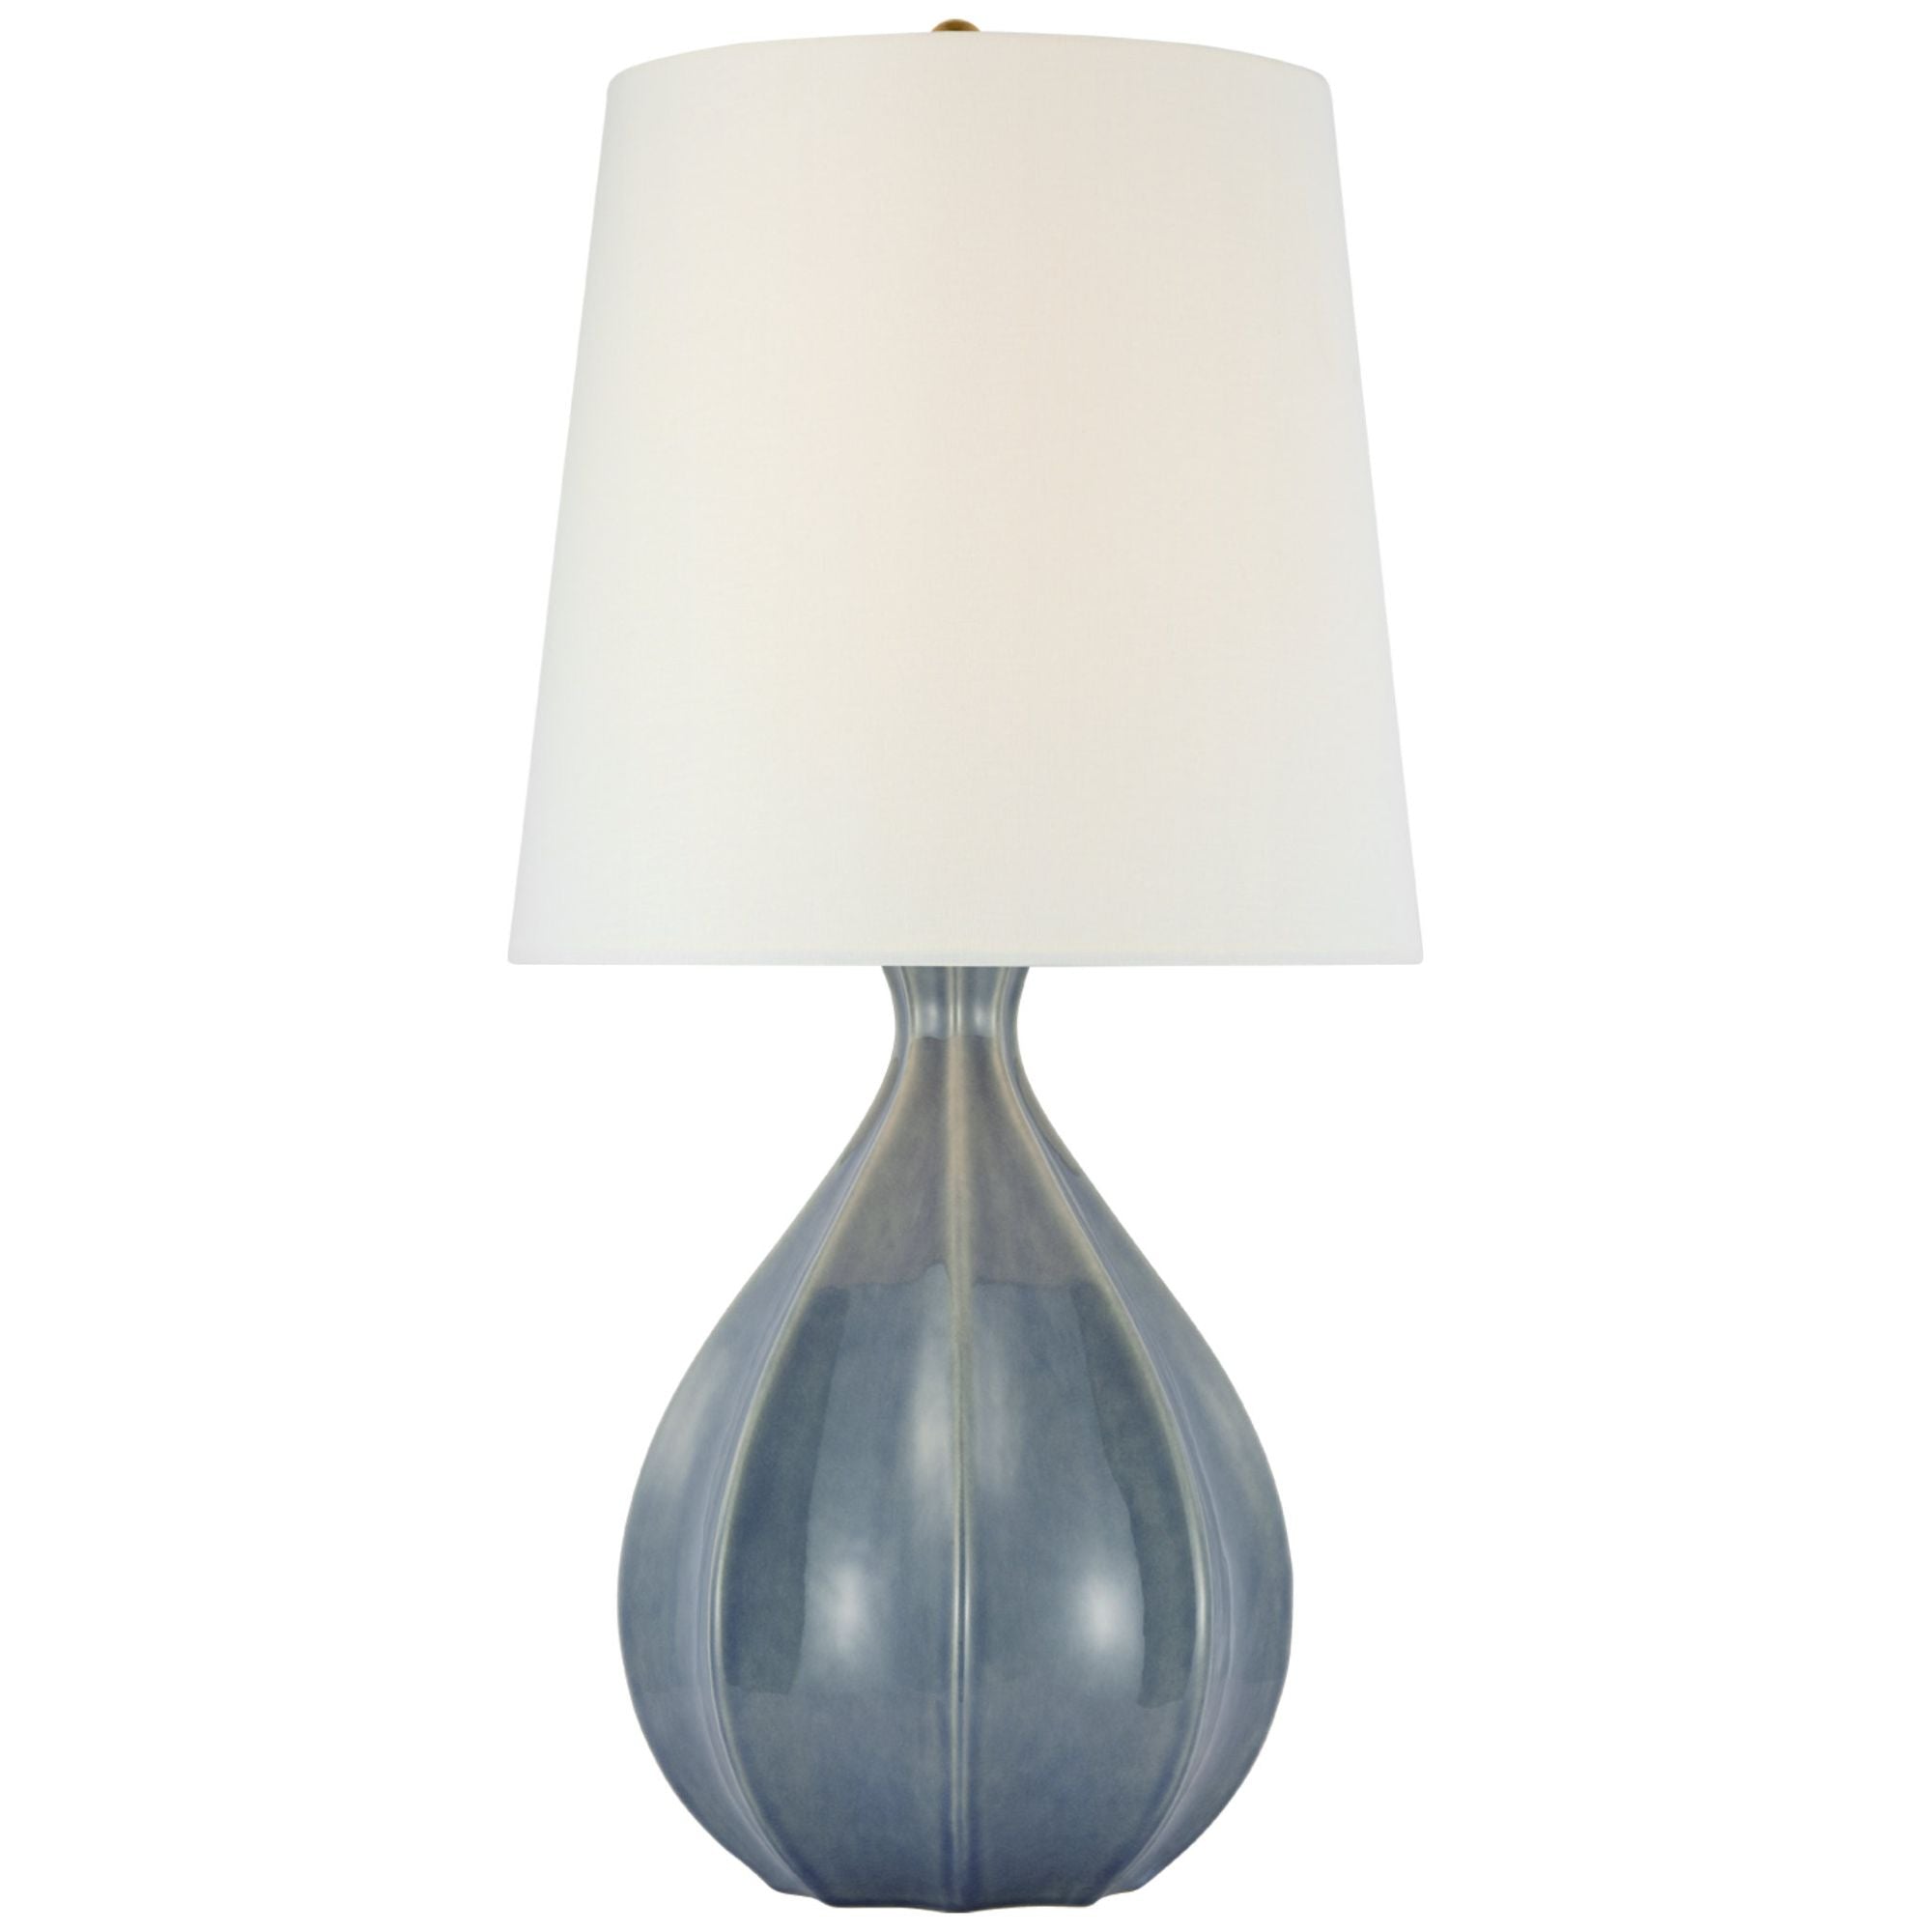 AERIN Rana Large Table Lamp in Polar Blue Crackle with Linen Shade